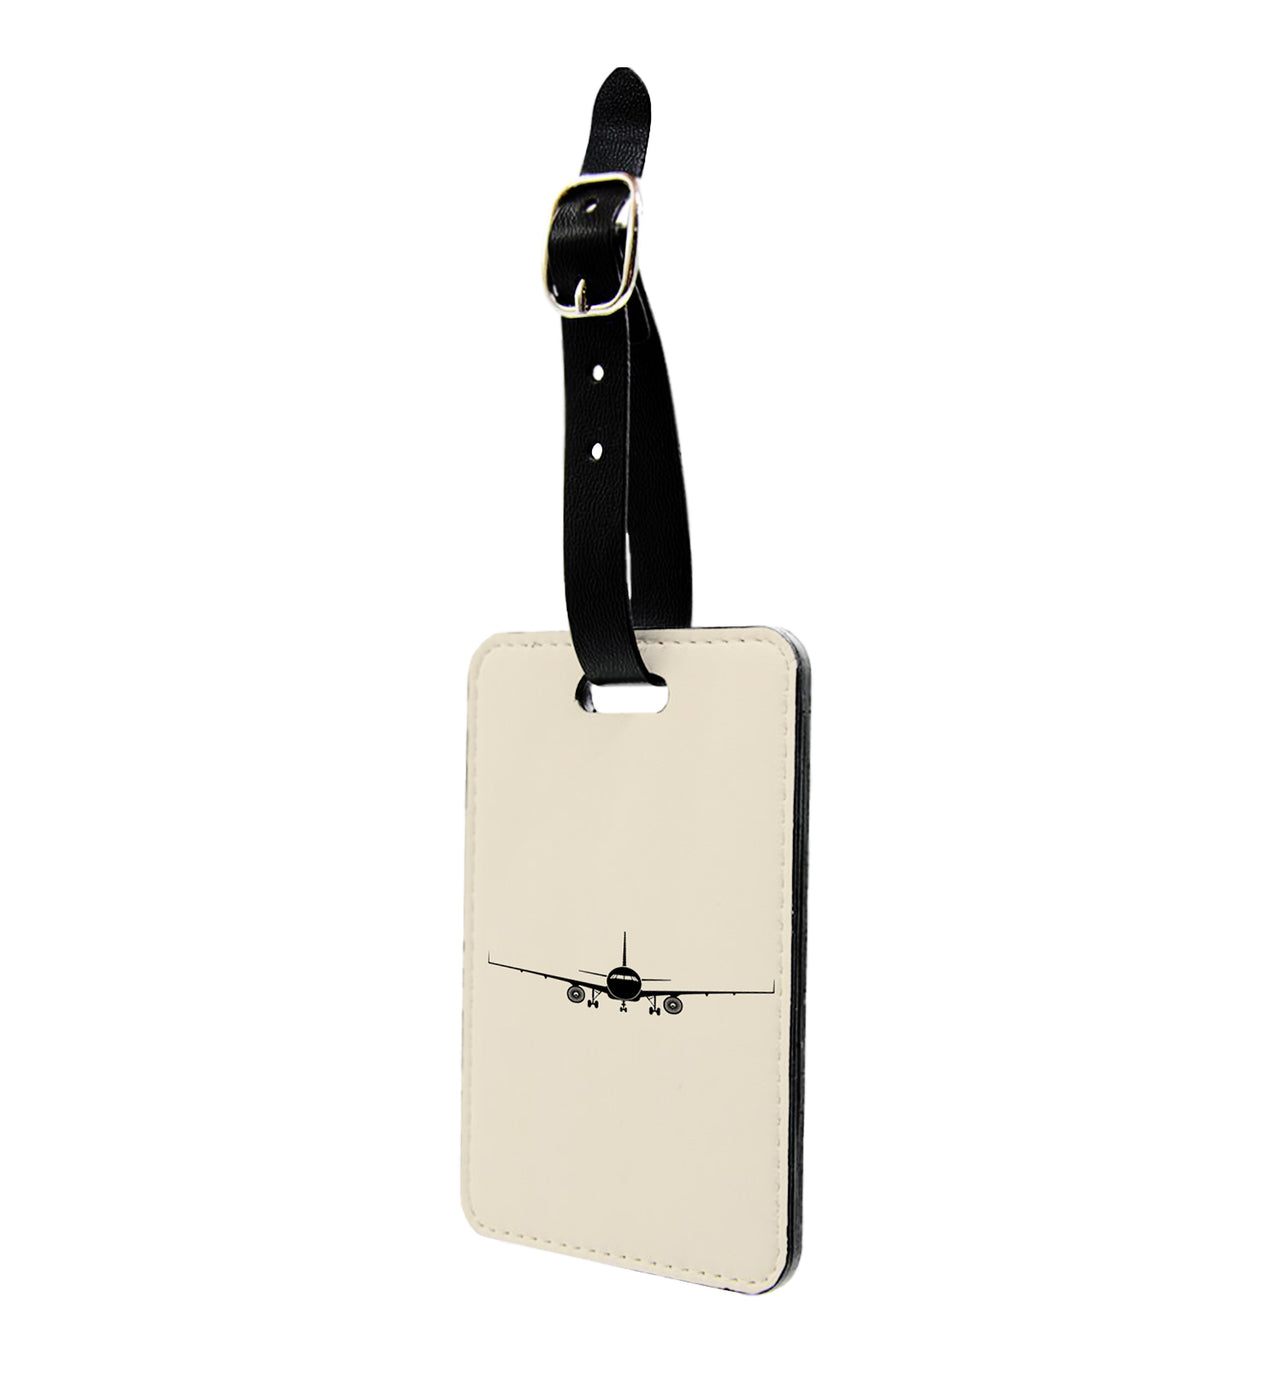 Airbus A320 Silhouette Designed Luggage Tag